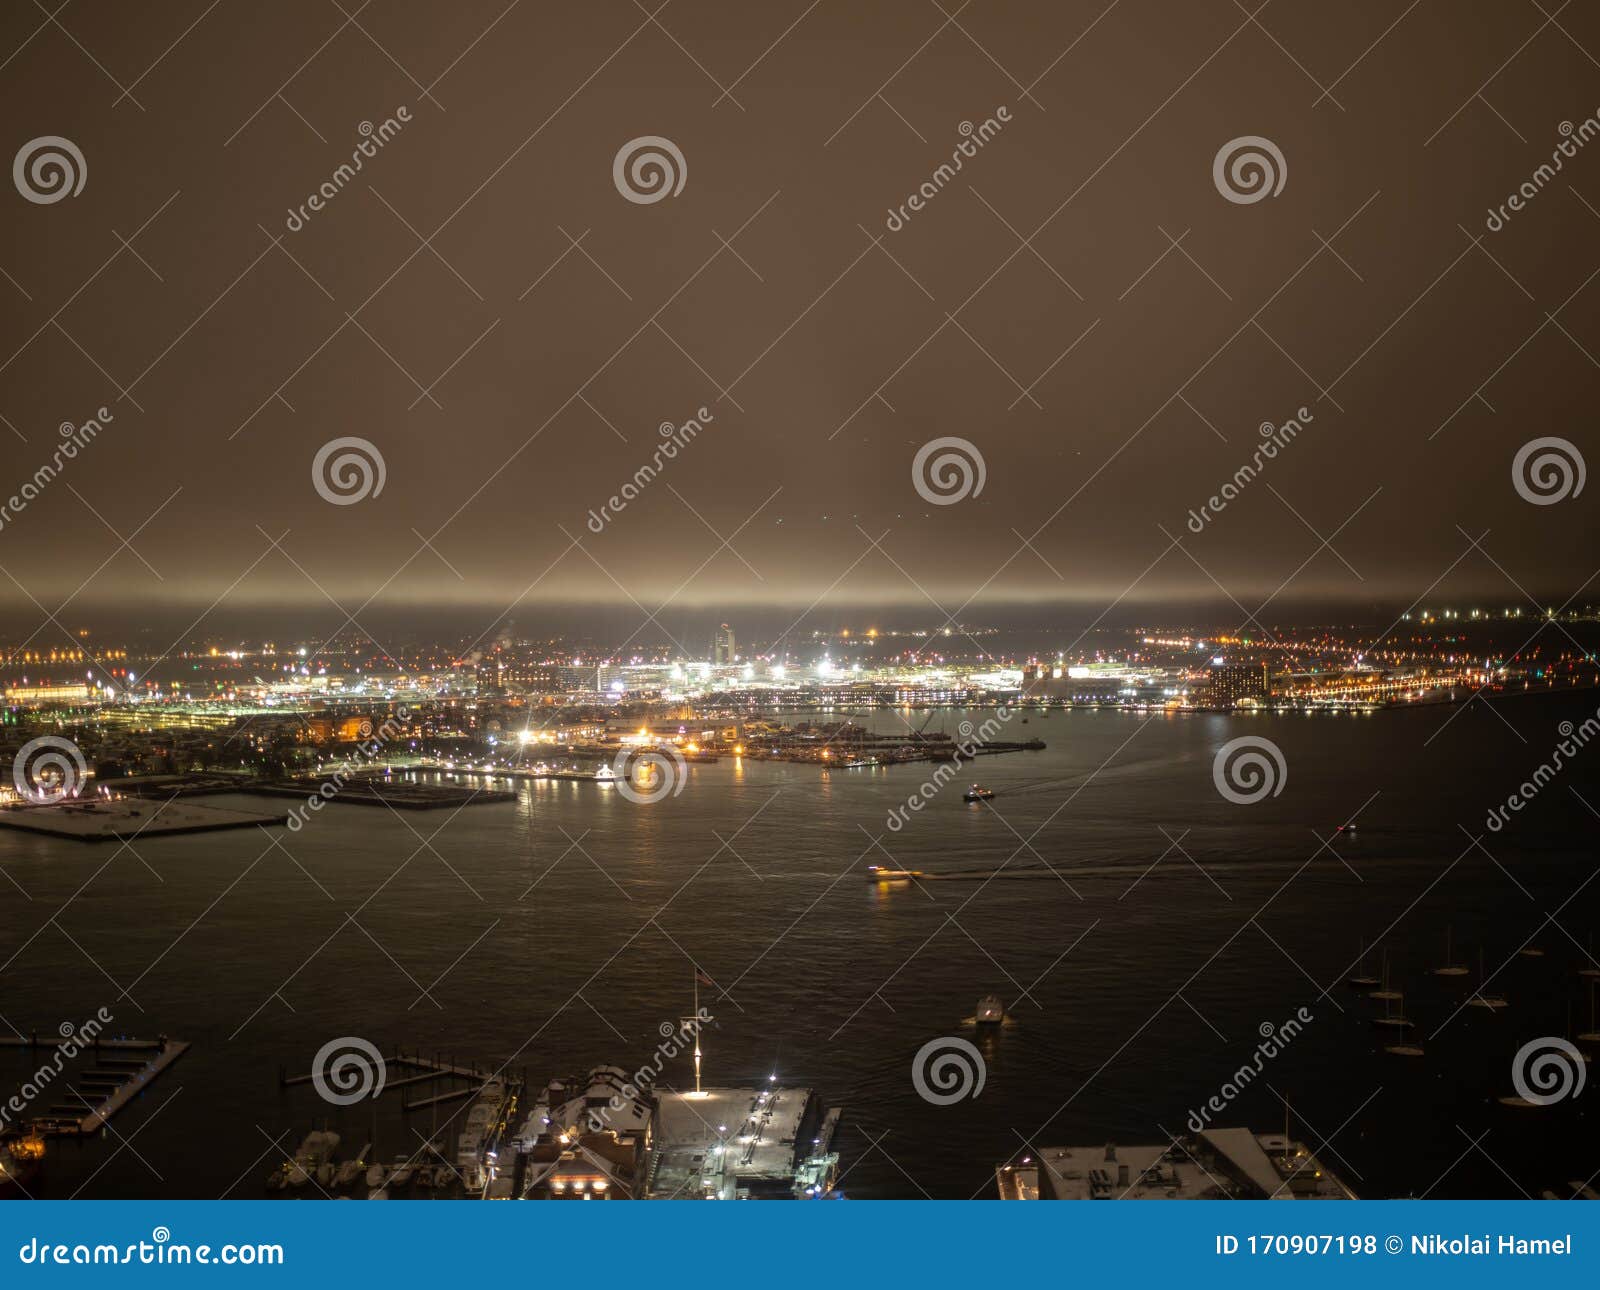 boston harbor as seen from a birds eye view at night in winter